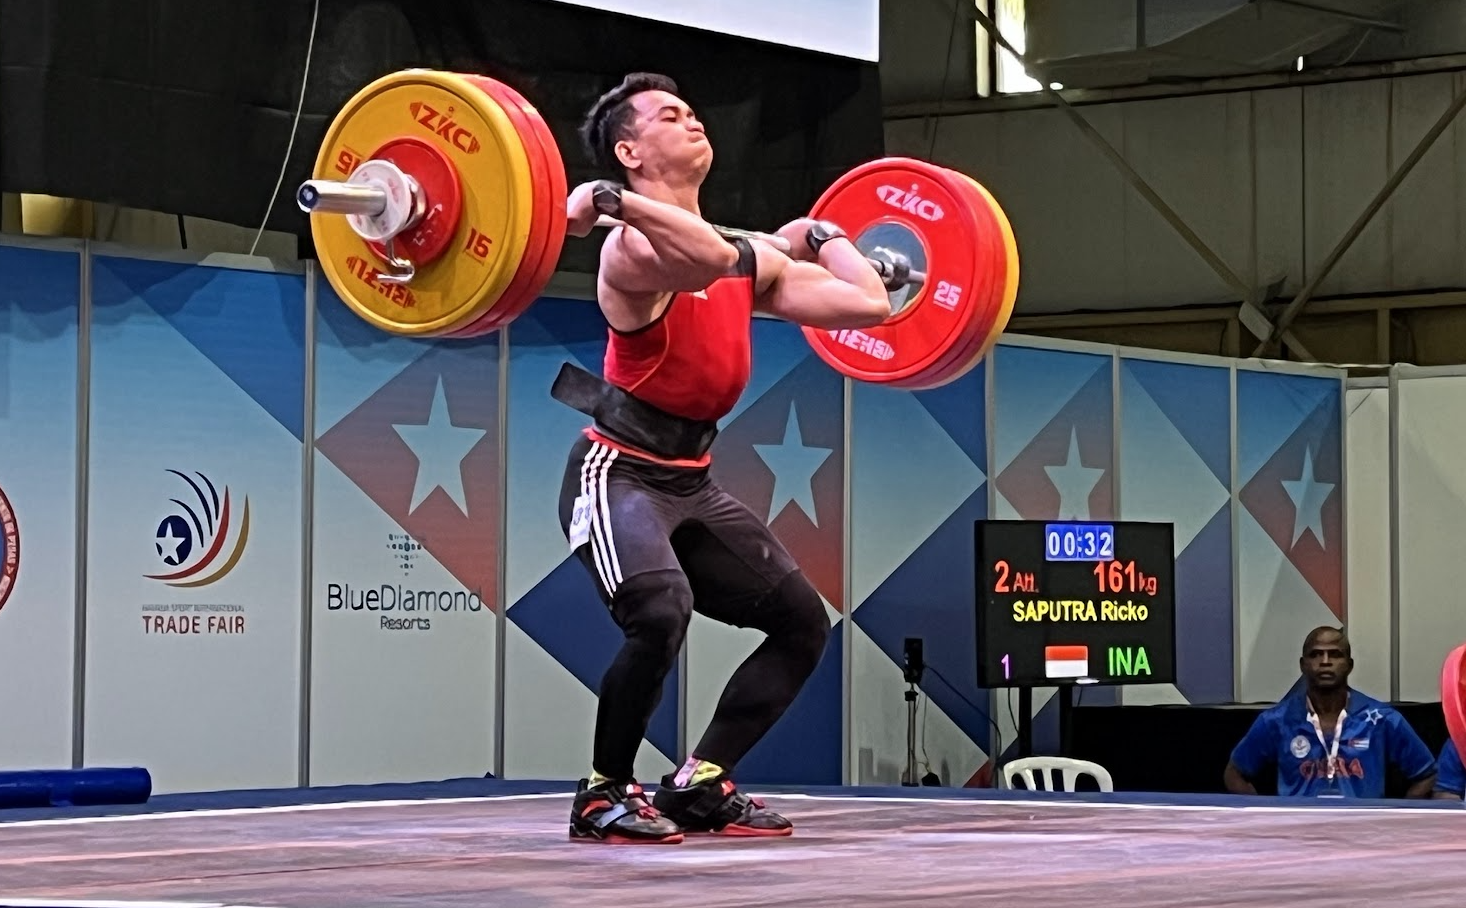 A good day for US weightlifters - and another medal for late starter Gallant